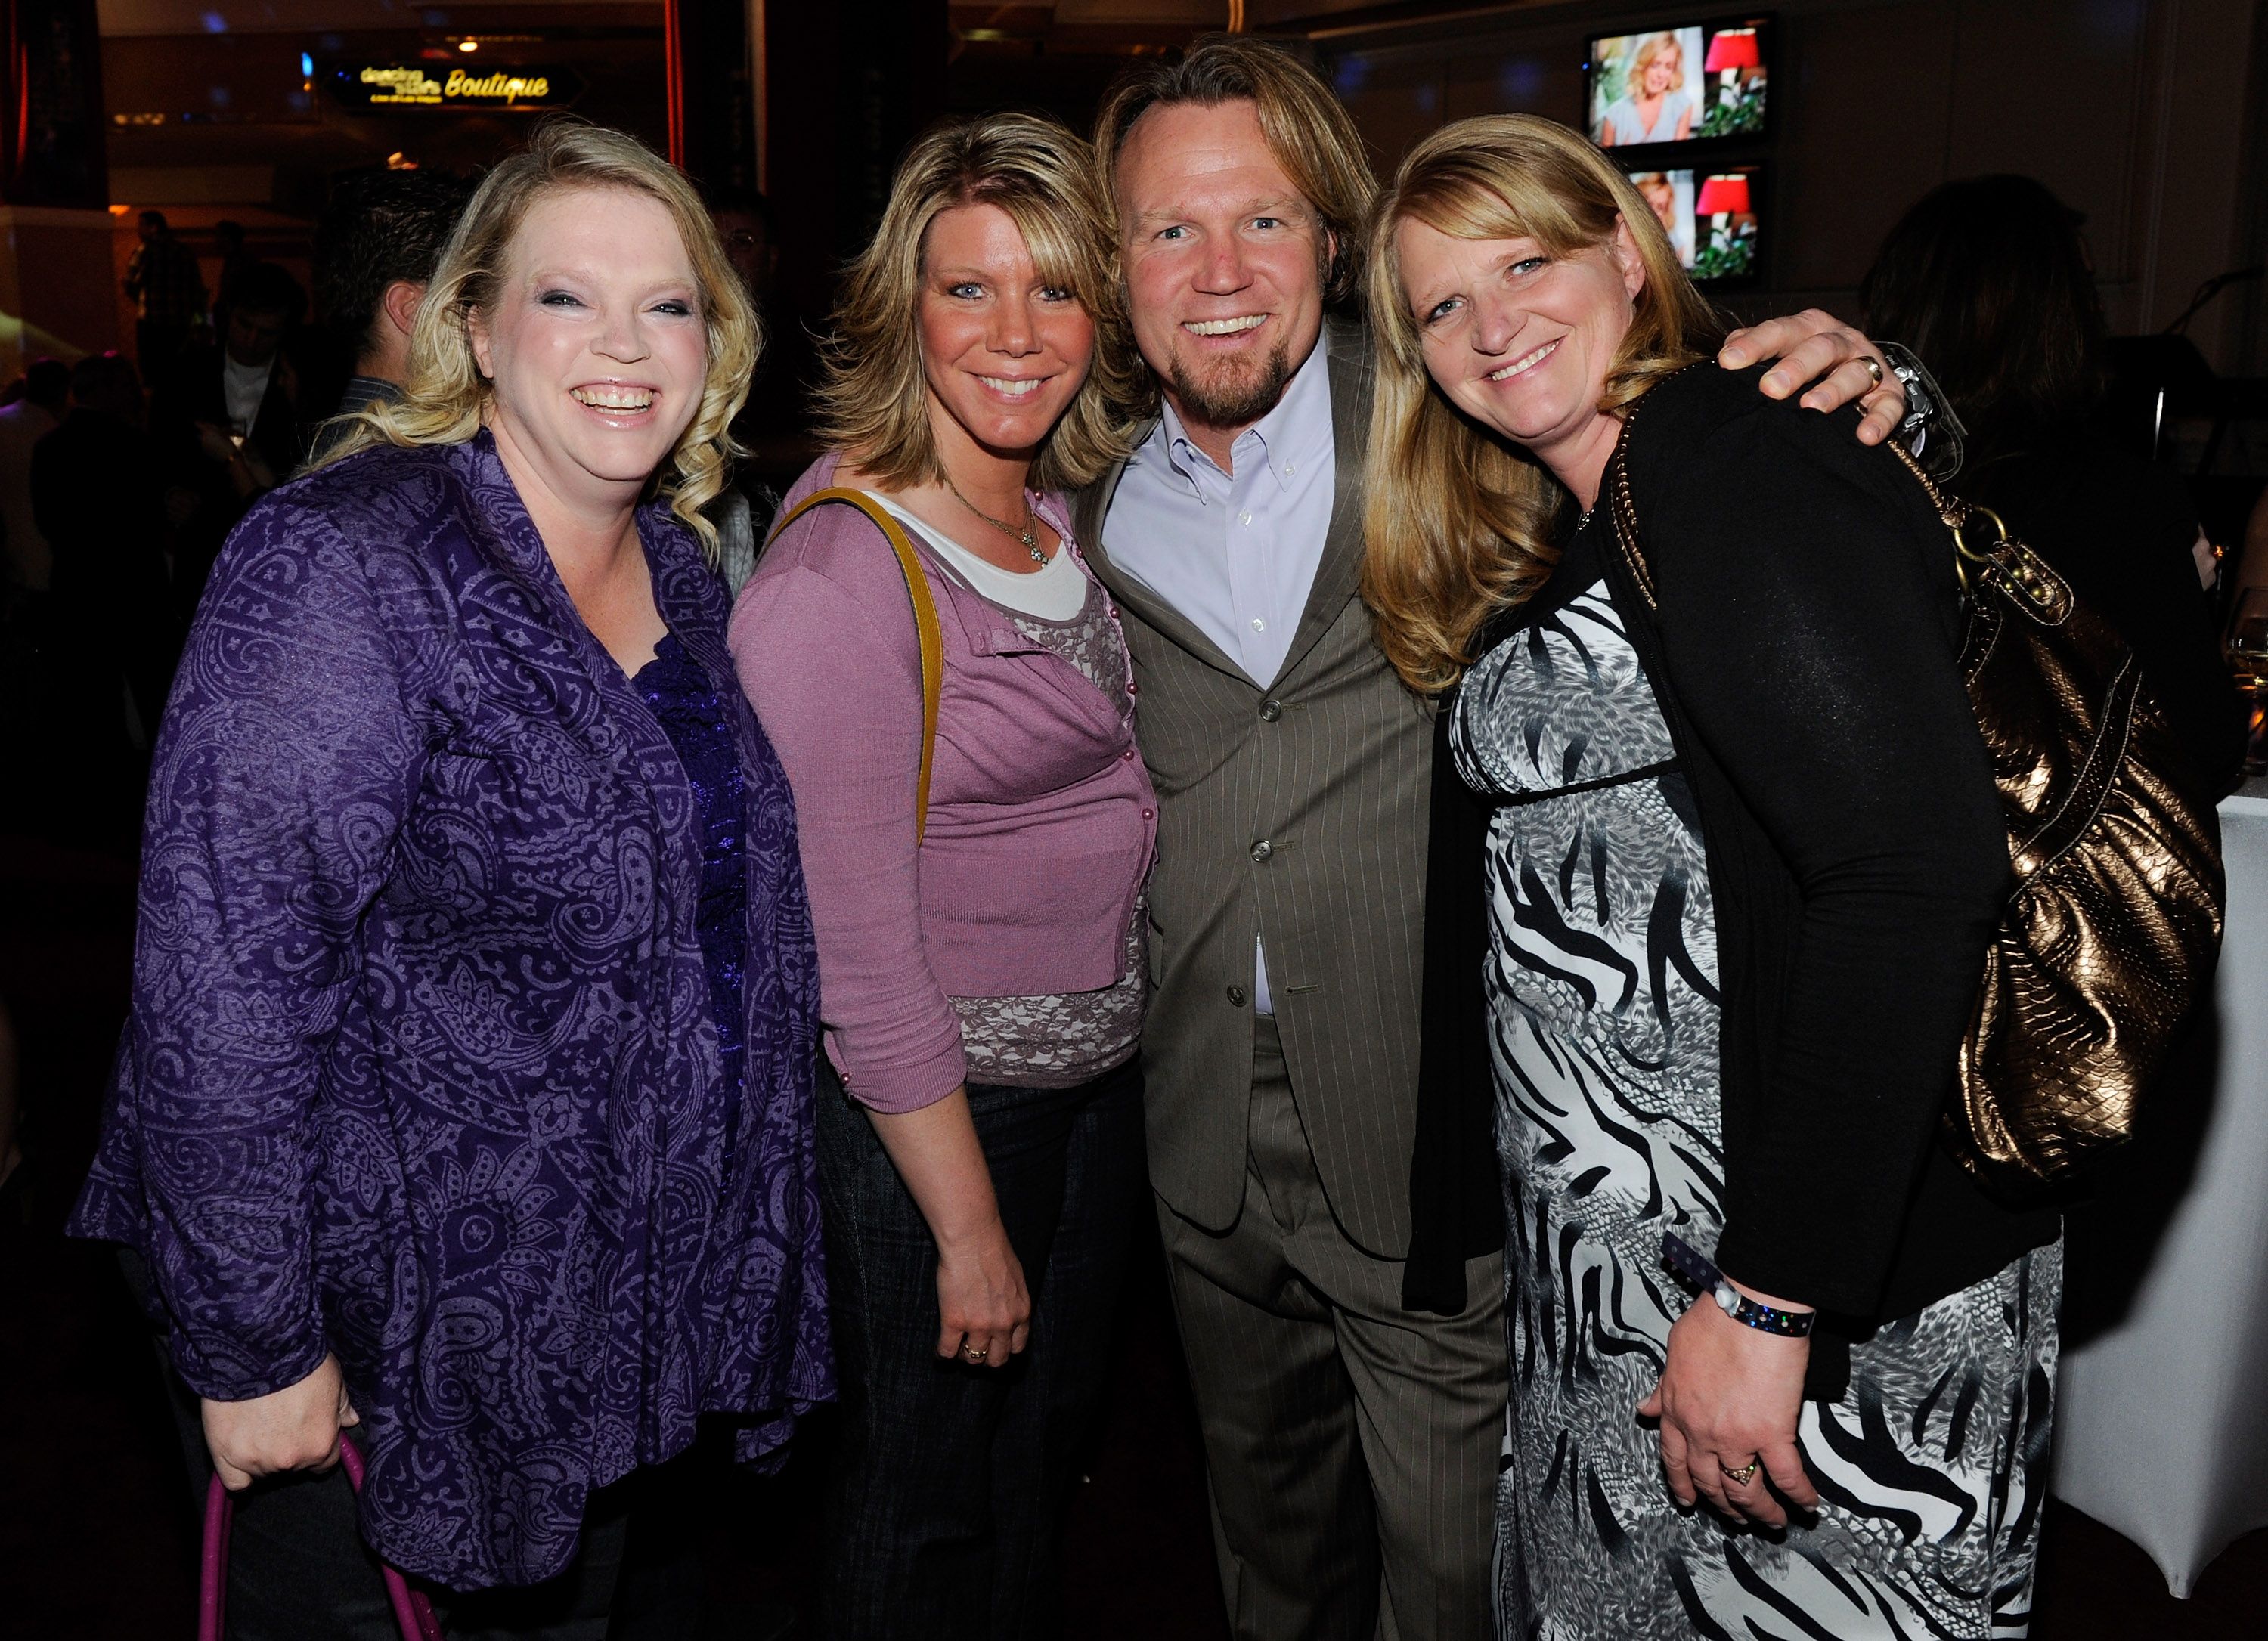 News about wives current sister 'Sister Wives'